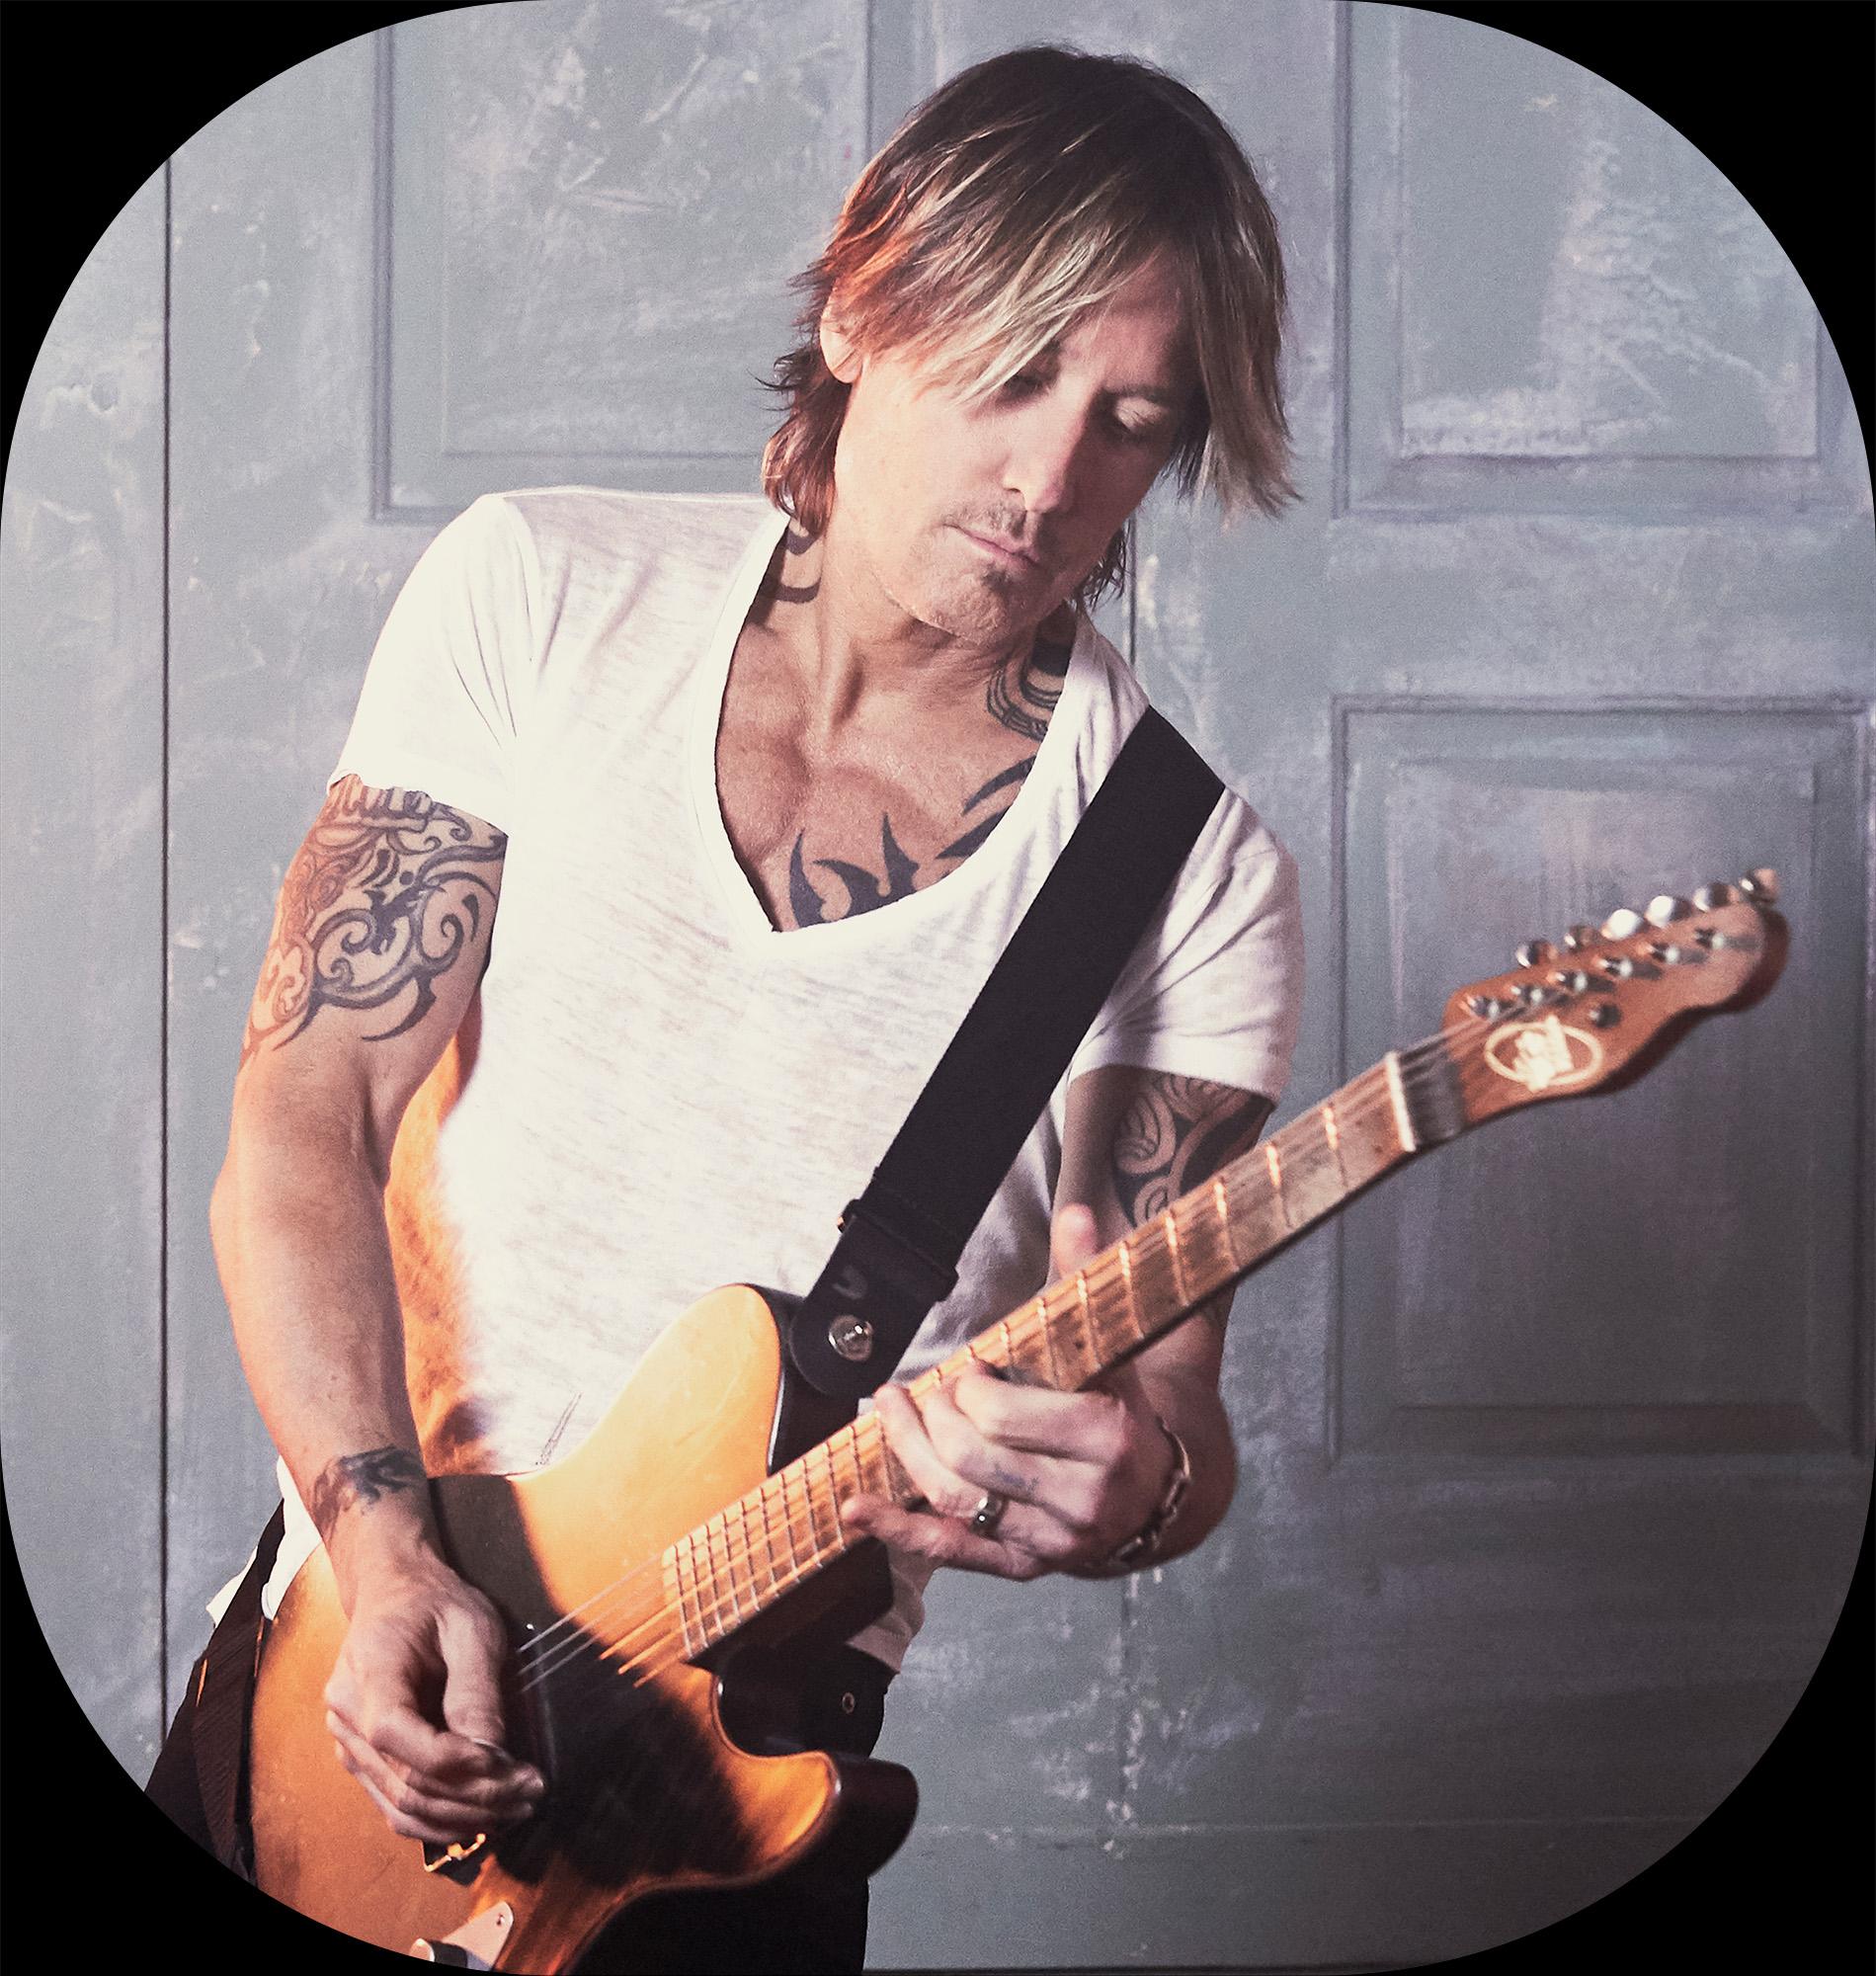 Keith Urban with his guitar